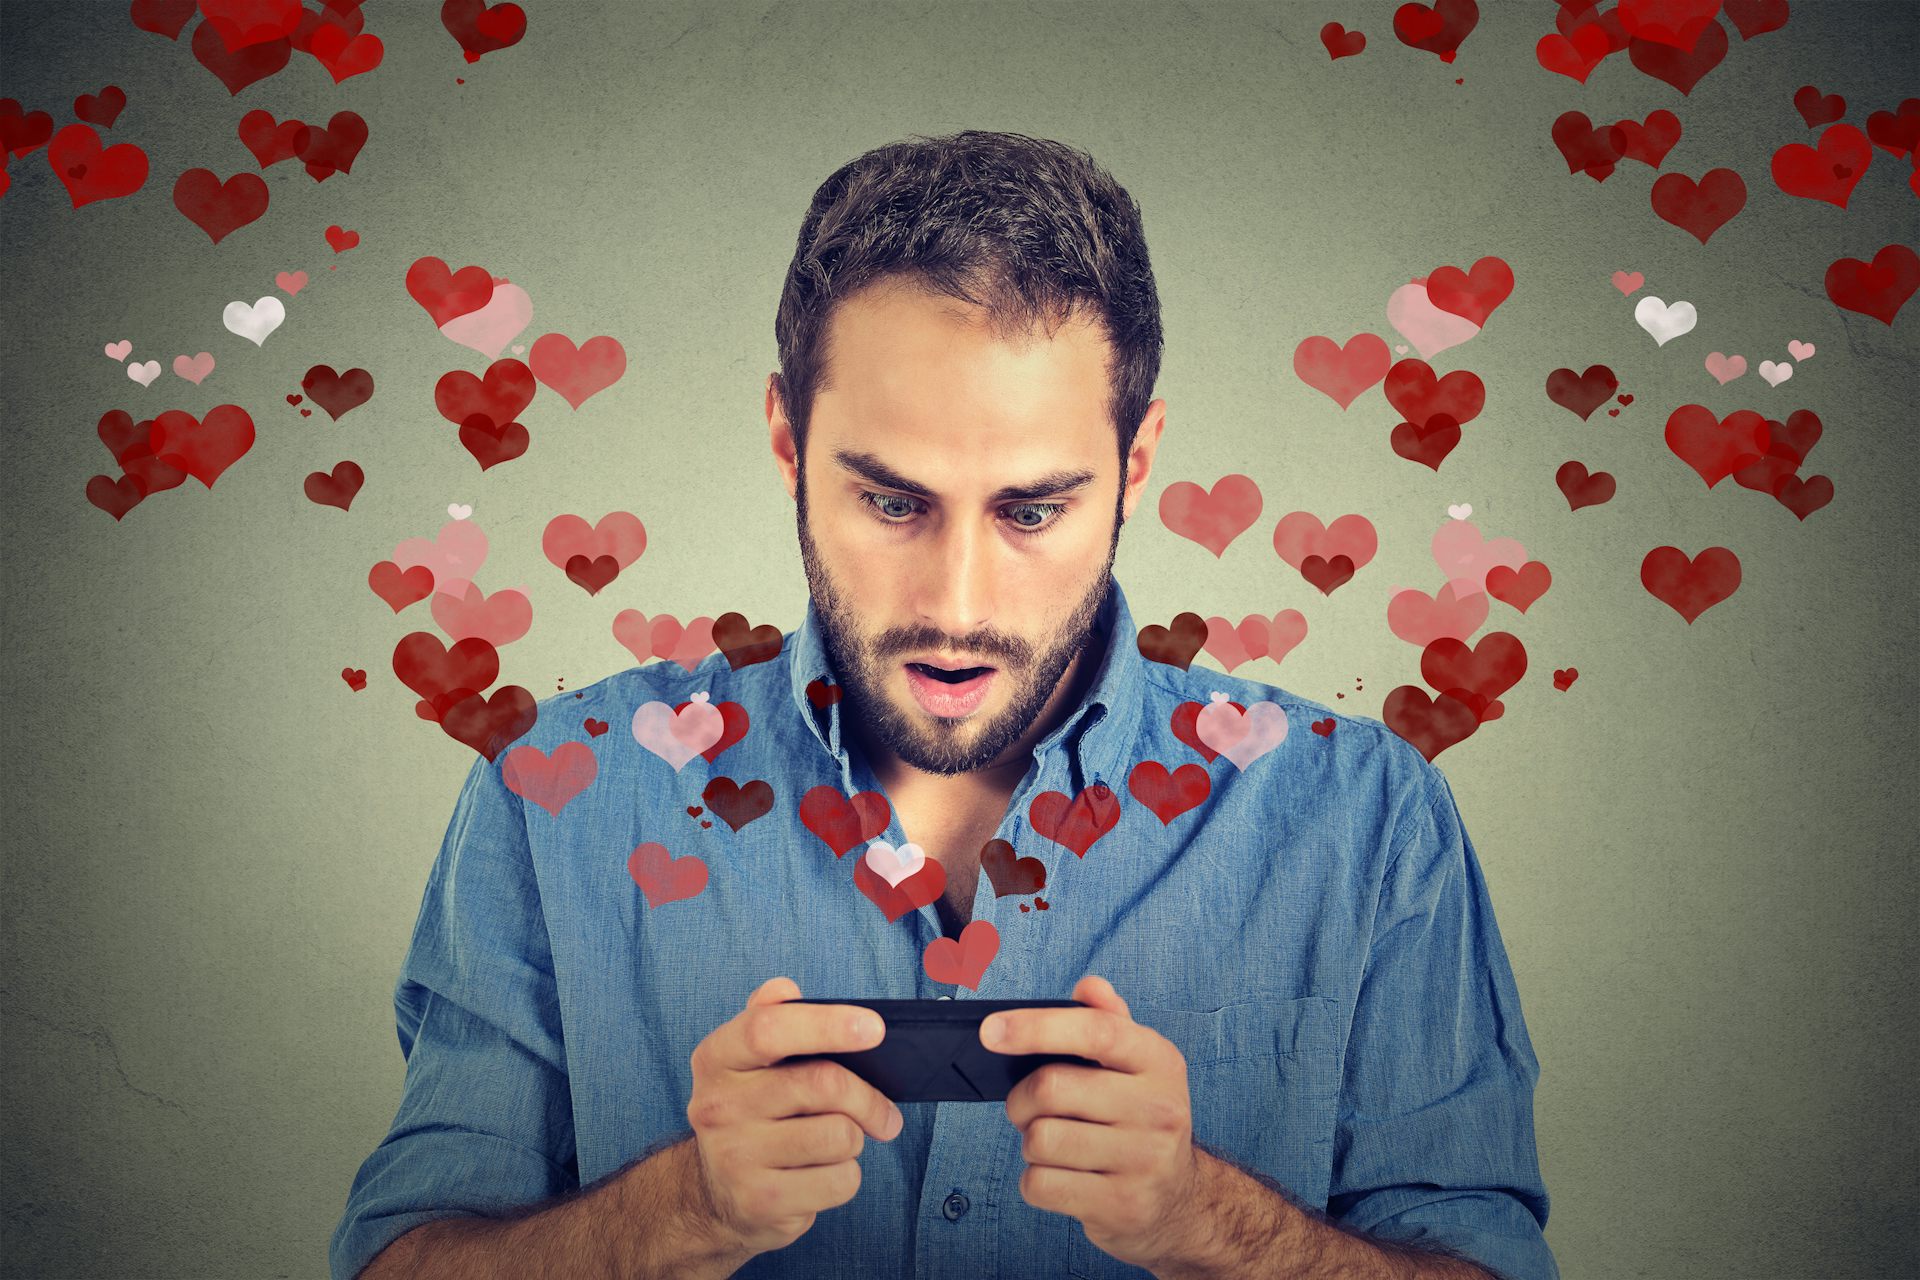 Online Dating Shows Us the Cold, Hard Facts About Race in America